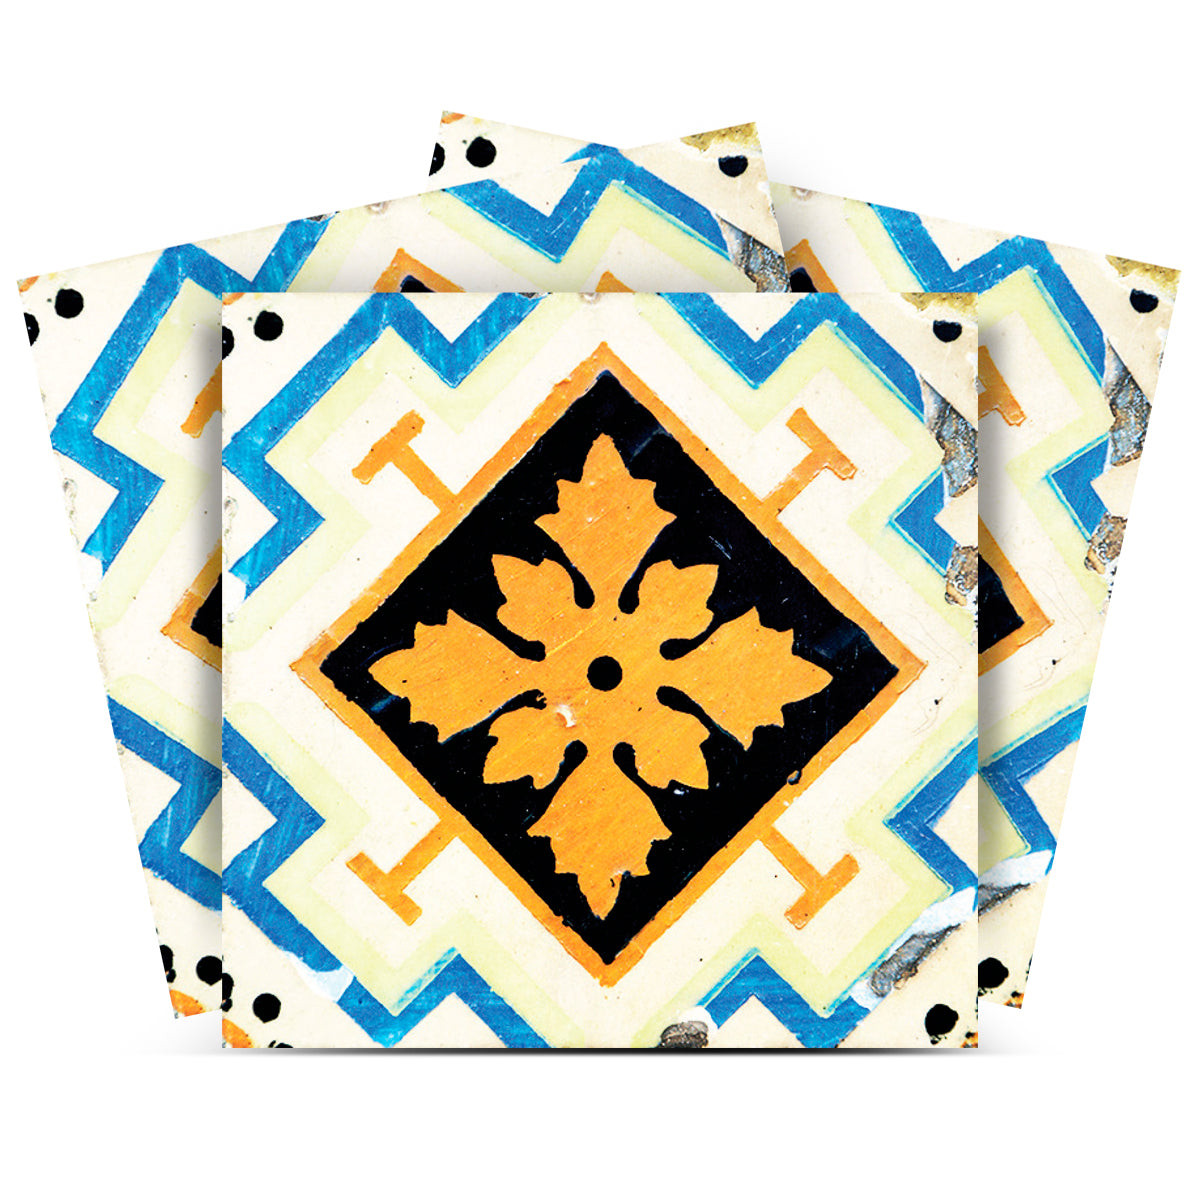 7" x 7" Gold Snowflake Peel and Stick Removable Tiles-400487-1